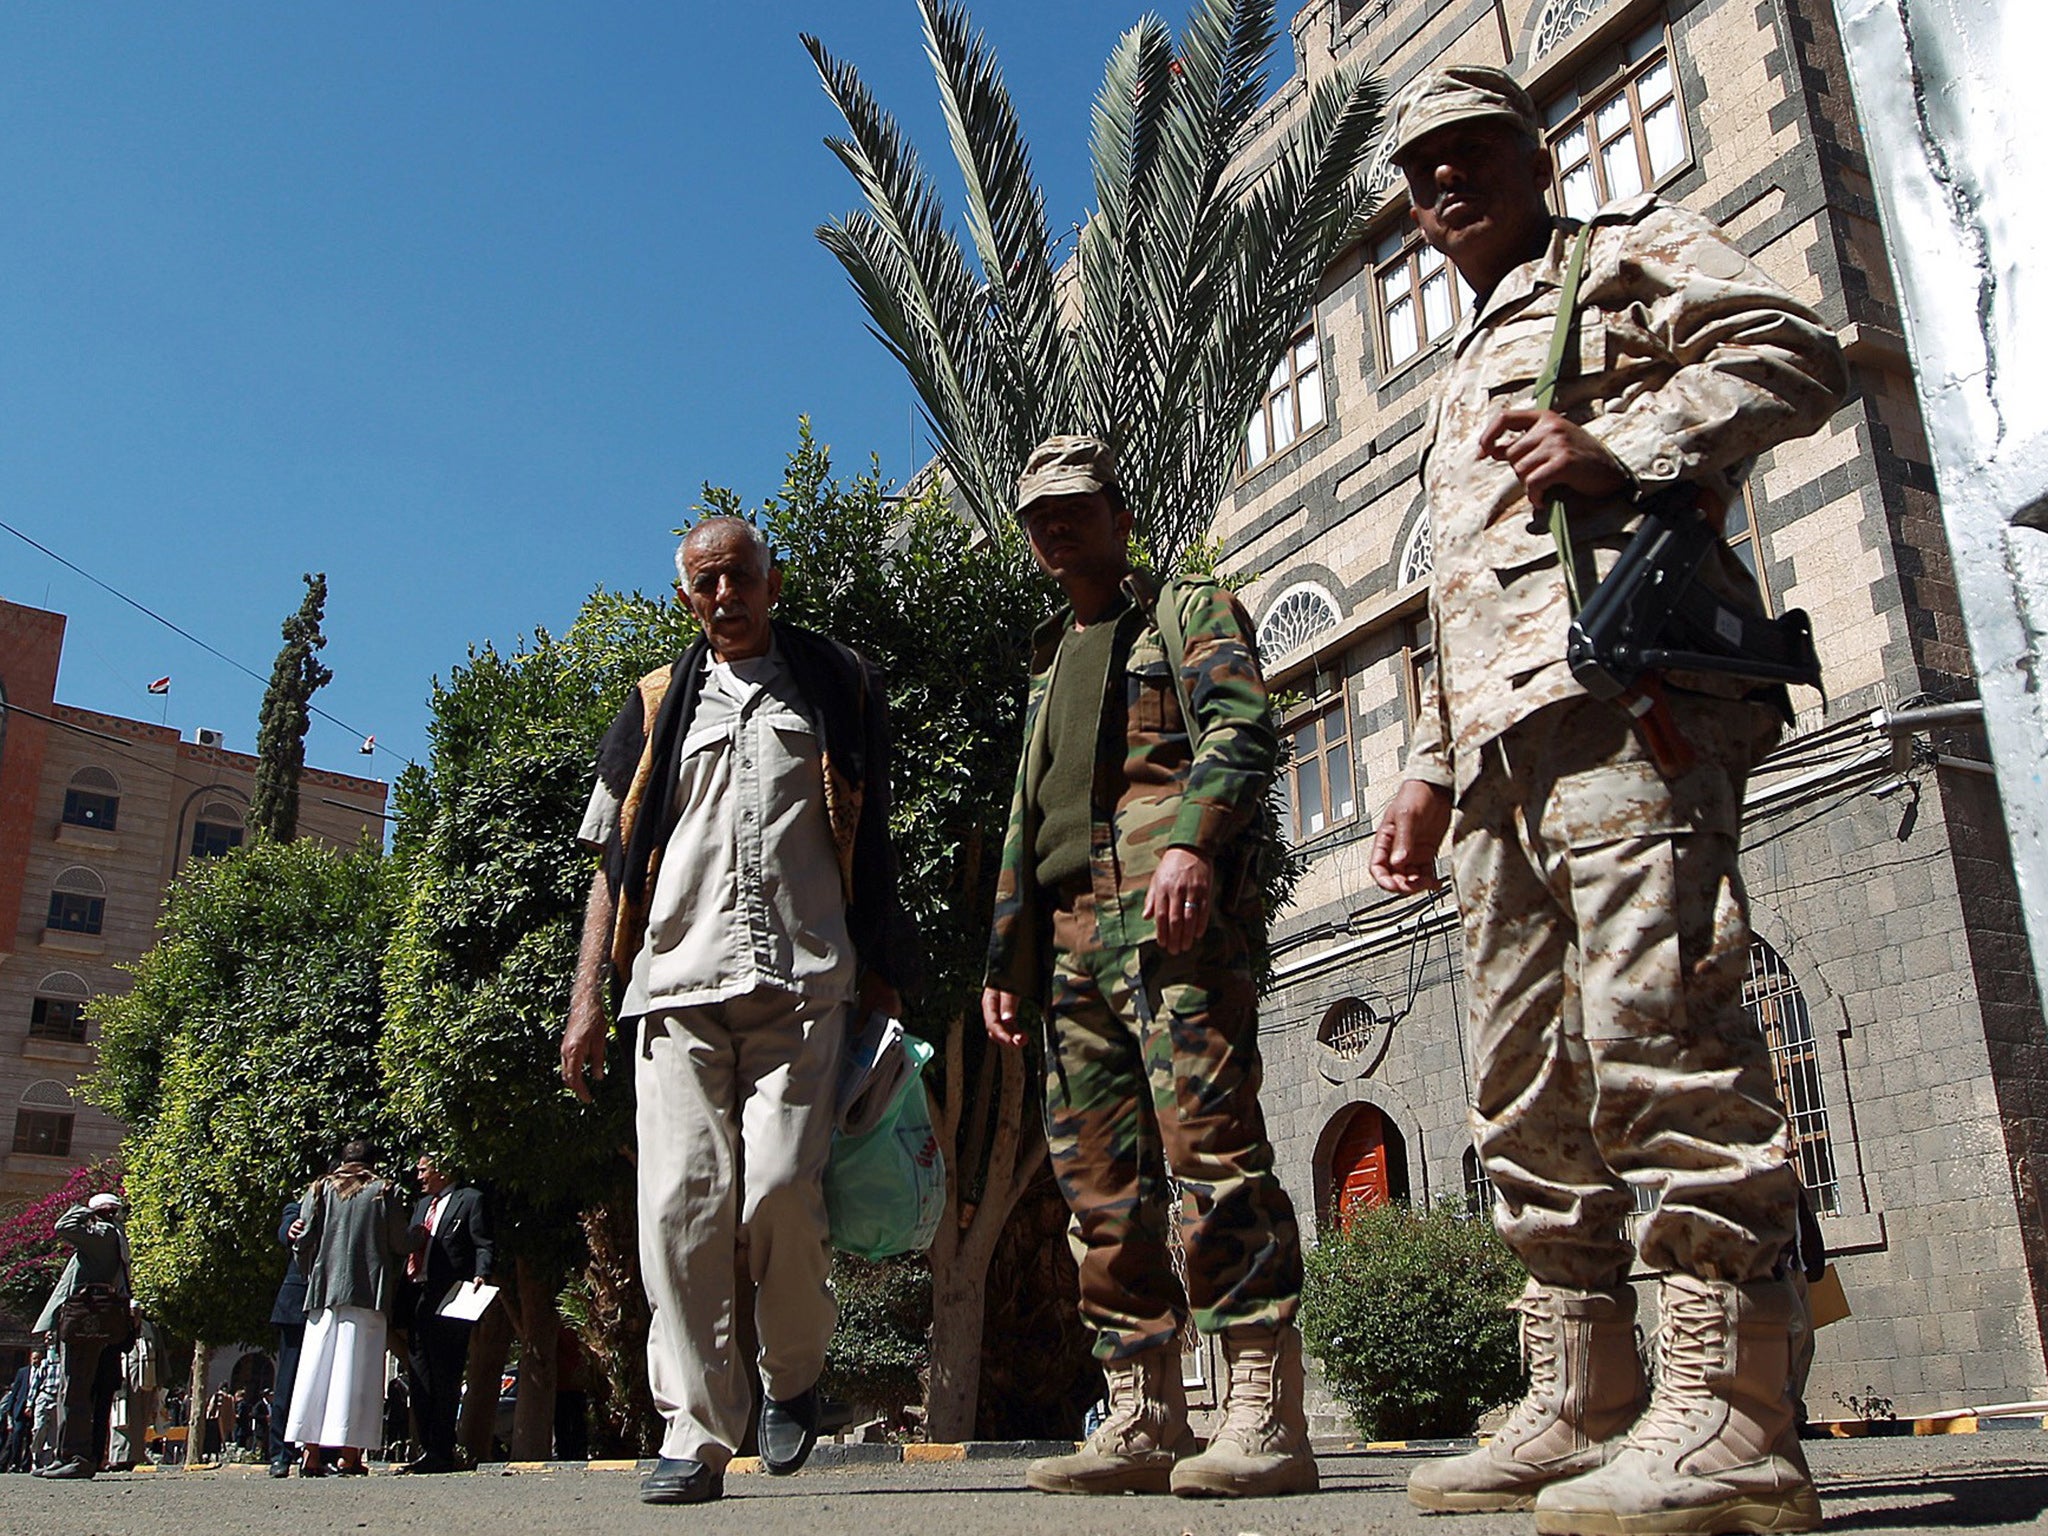 Security officers outside the Yemeni parliament during a debate about the policies of the newly appointed government in Sanaa on 16 December 2014